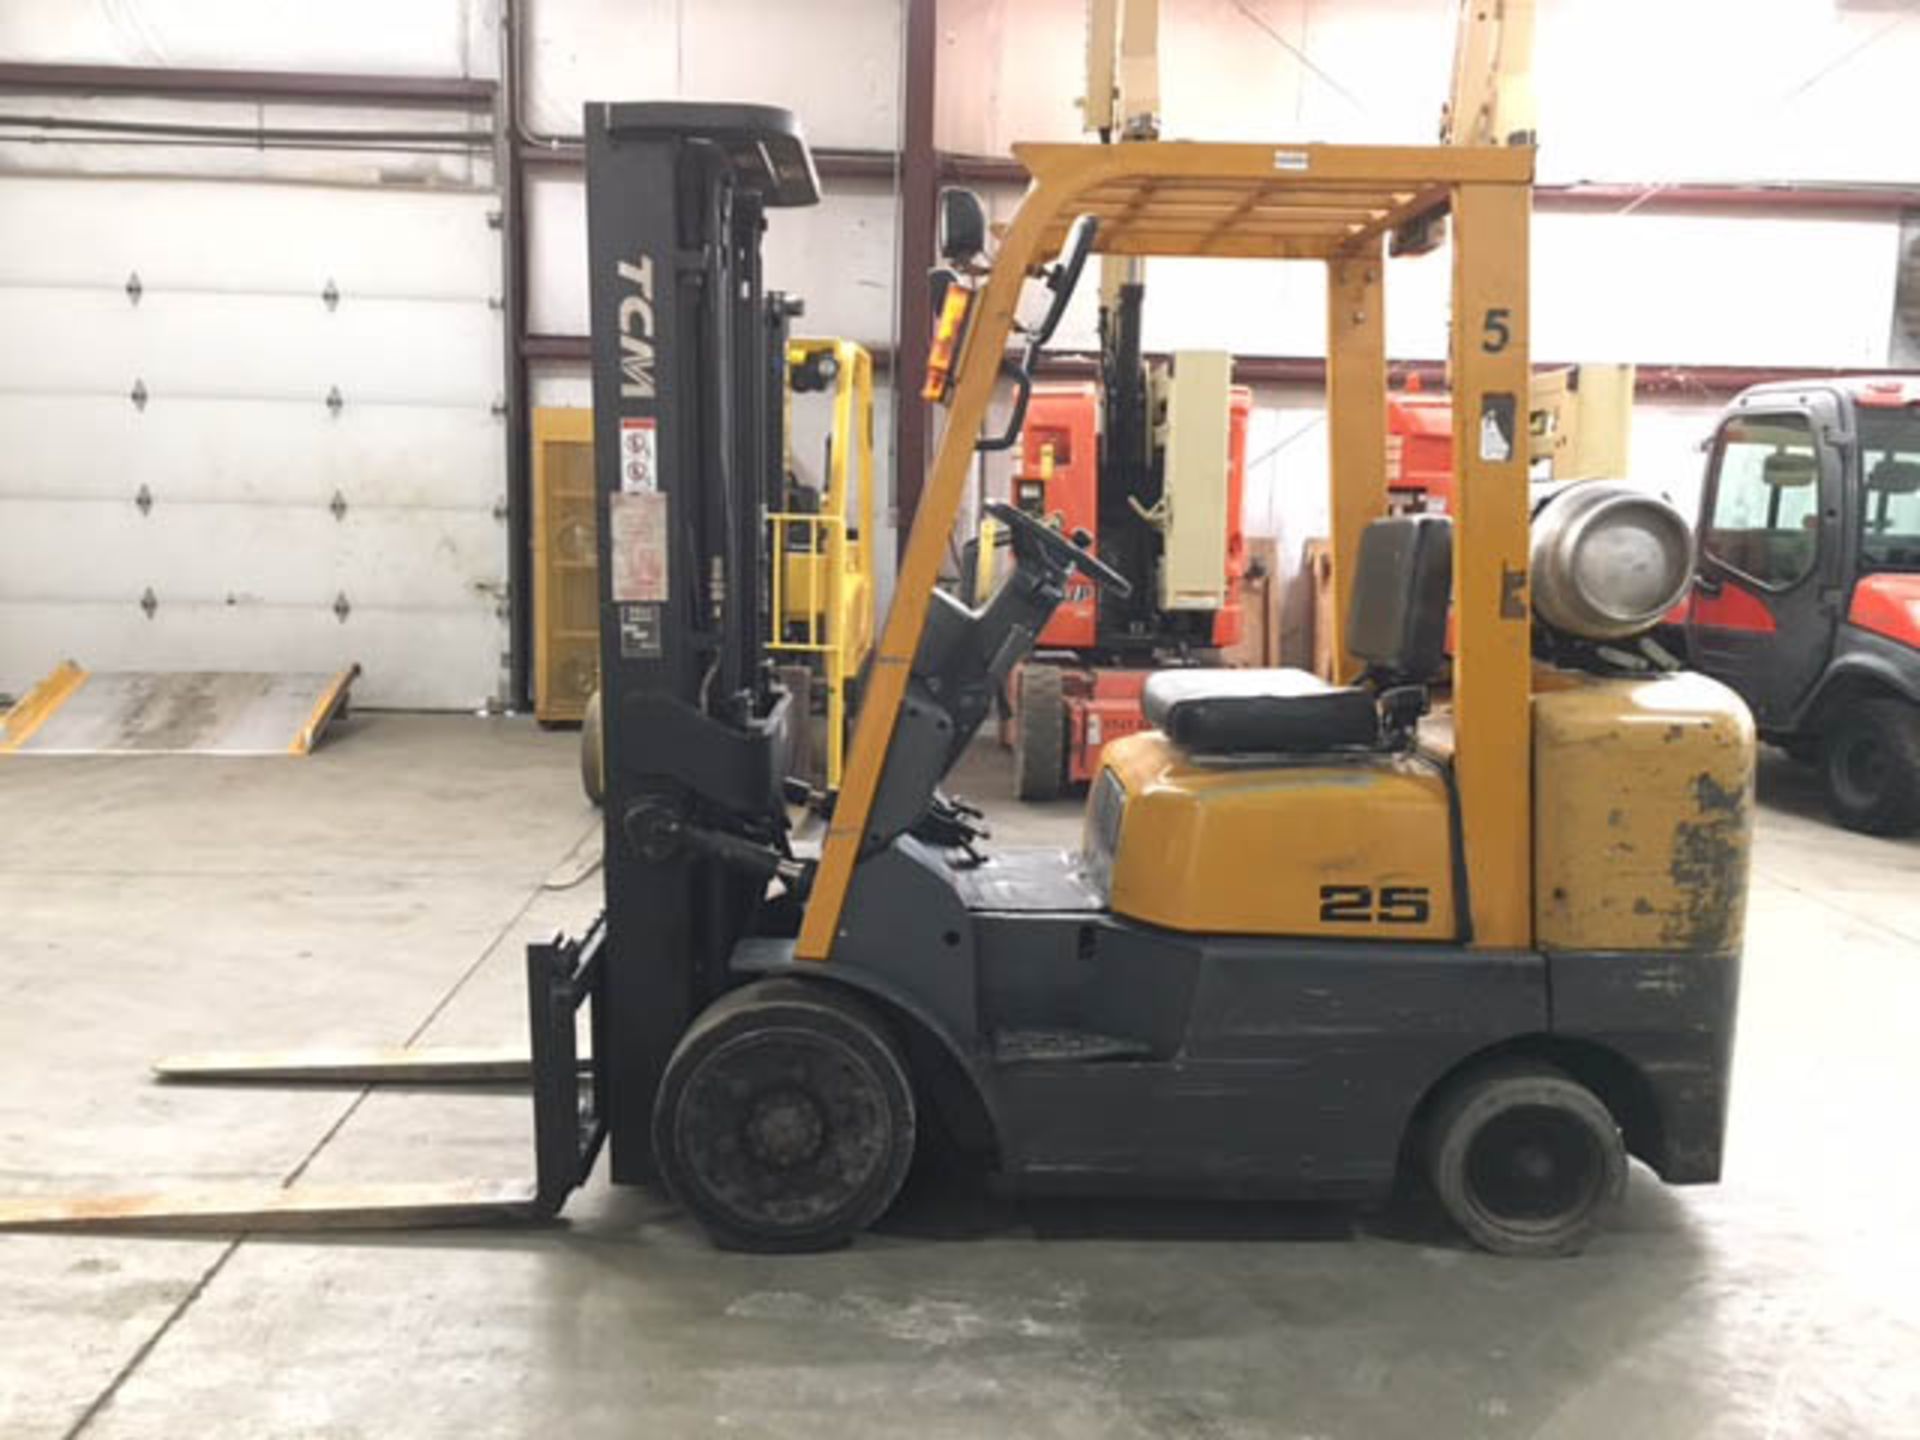 2005 TCM 5;000-LB.; MOD: FCG25; SN: A47M00625; LPG; SOLID TIRES; 3-STAGE MAST; 189" LIFT, 8,224 Hrs